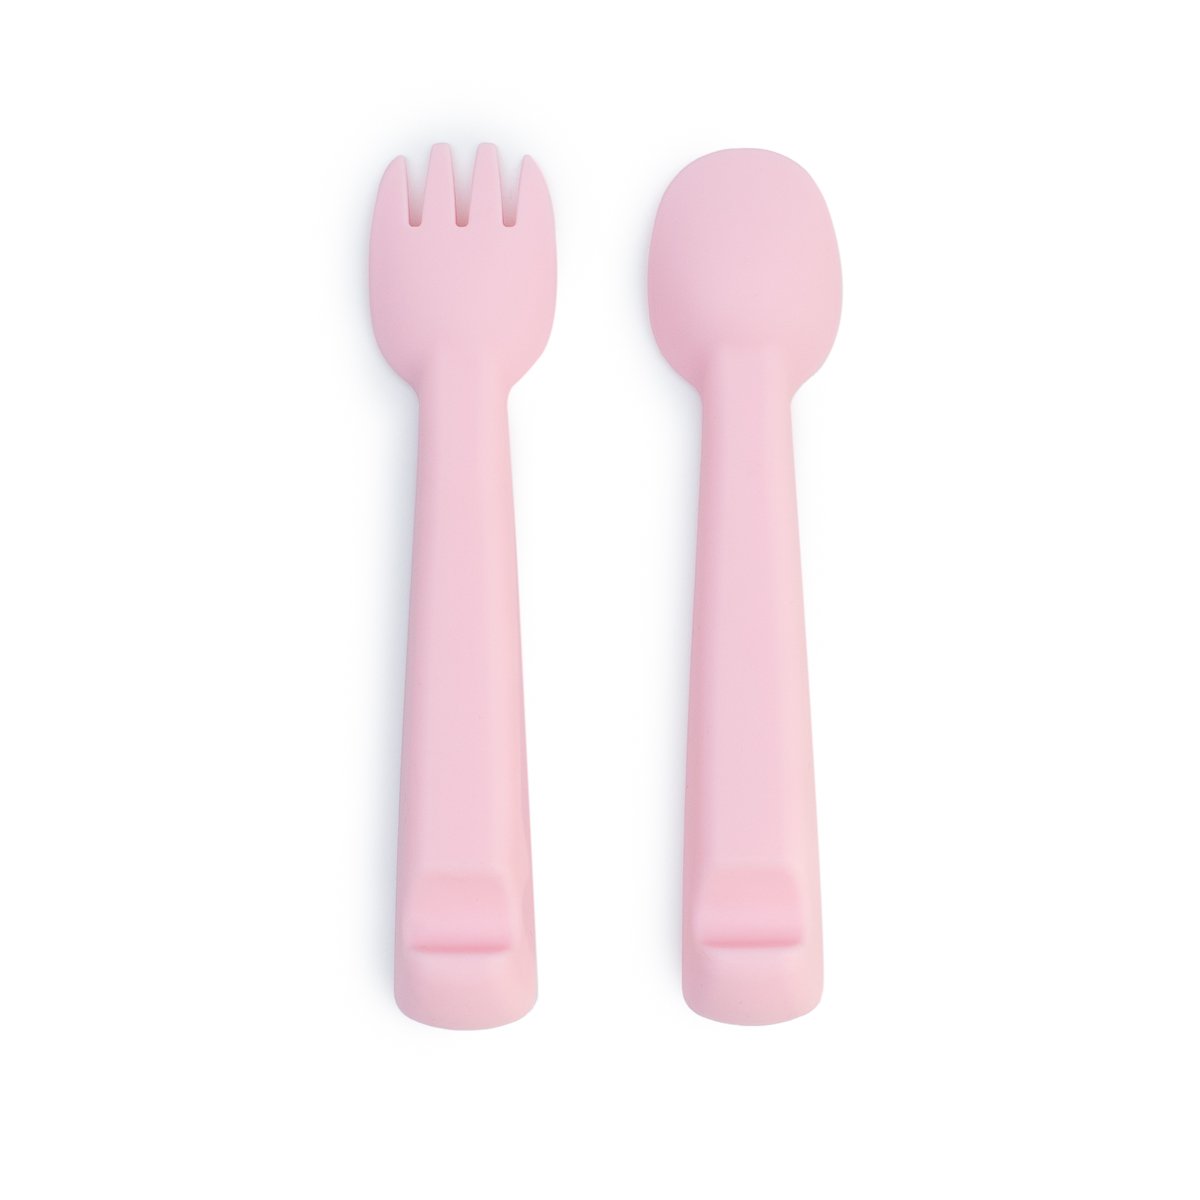 Feedie Fork & Spoon Set with Case - Powder Pink - Little Reef and Friends